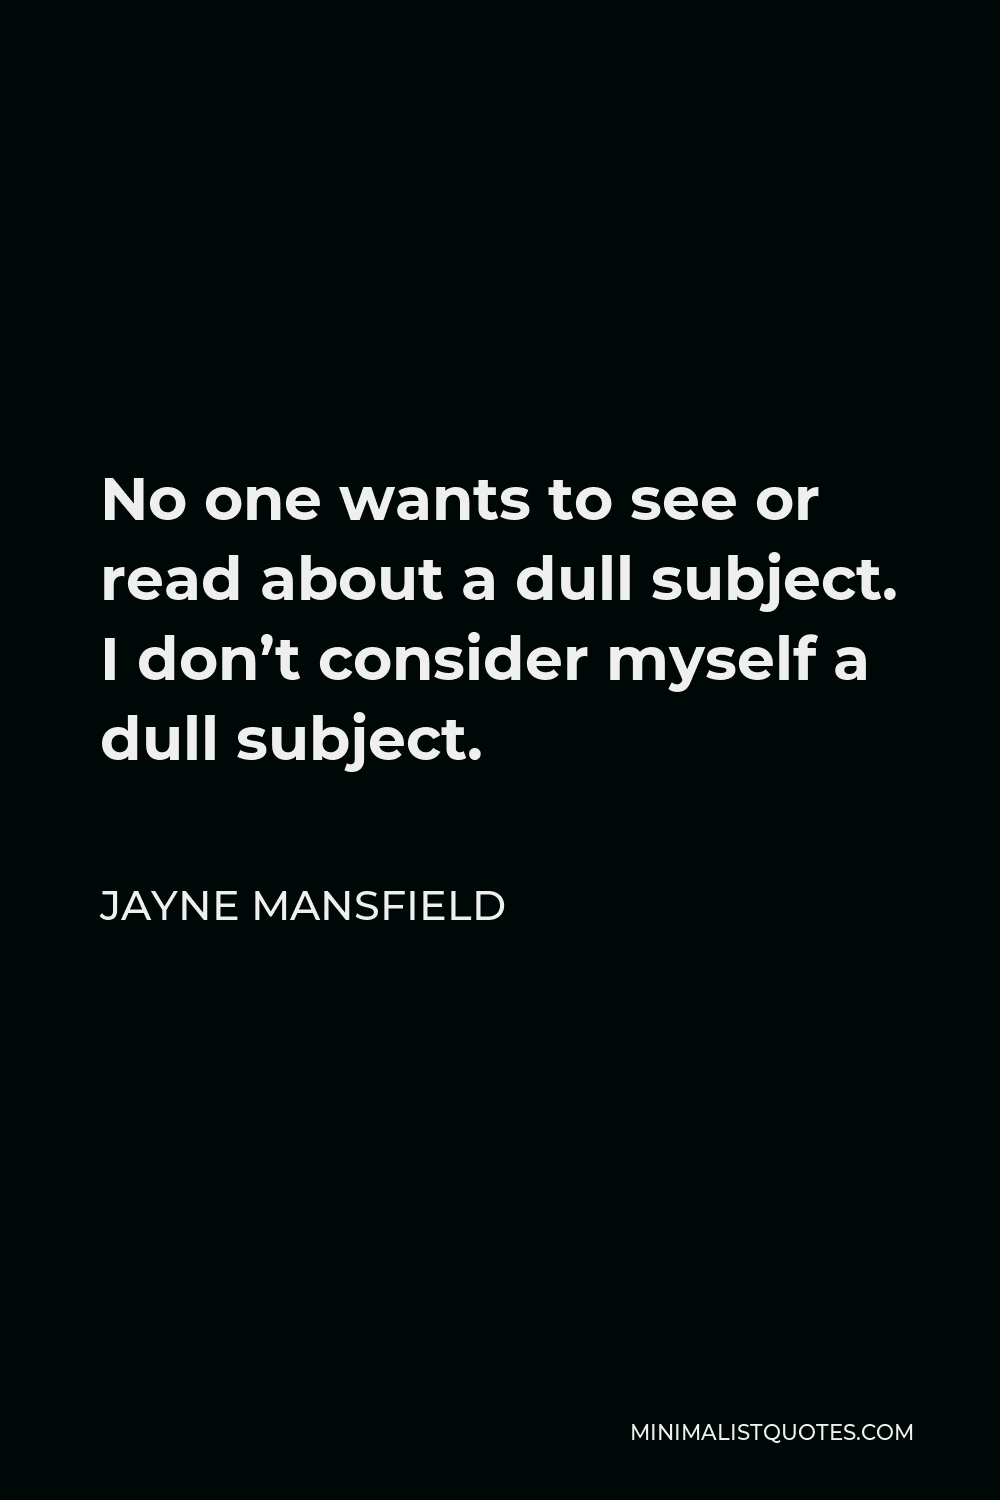 Jayne Mansfield Quote - No one wants to see or read about a dull subject. I don’t consider myself a dull subject.